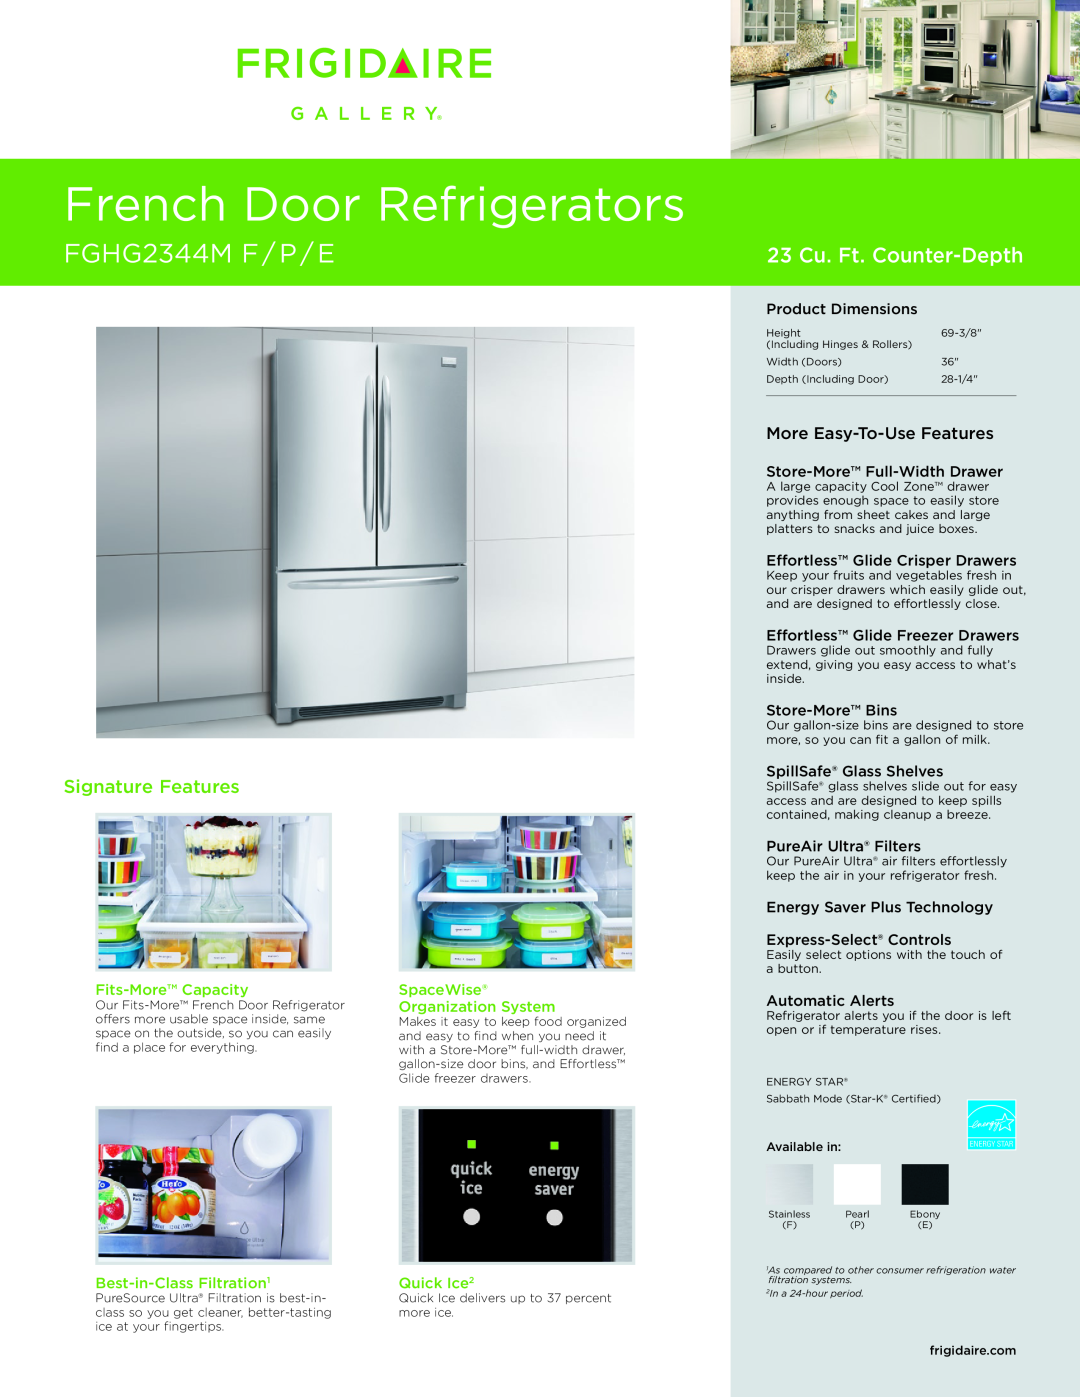 Frigidaire FGHG2344M dimensions Fits-MoreCapacity, SpaceWise, Organization System, Best-in-ClassFiltration1, Quick Ice2 